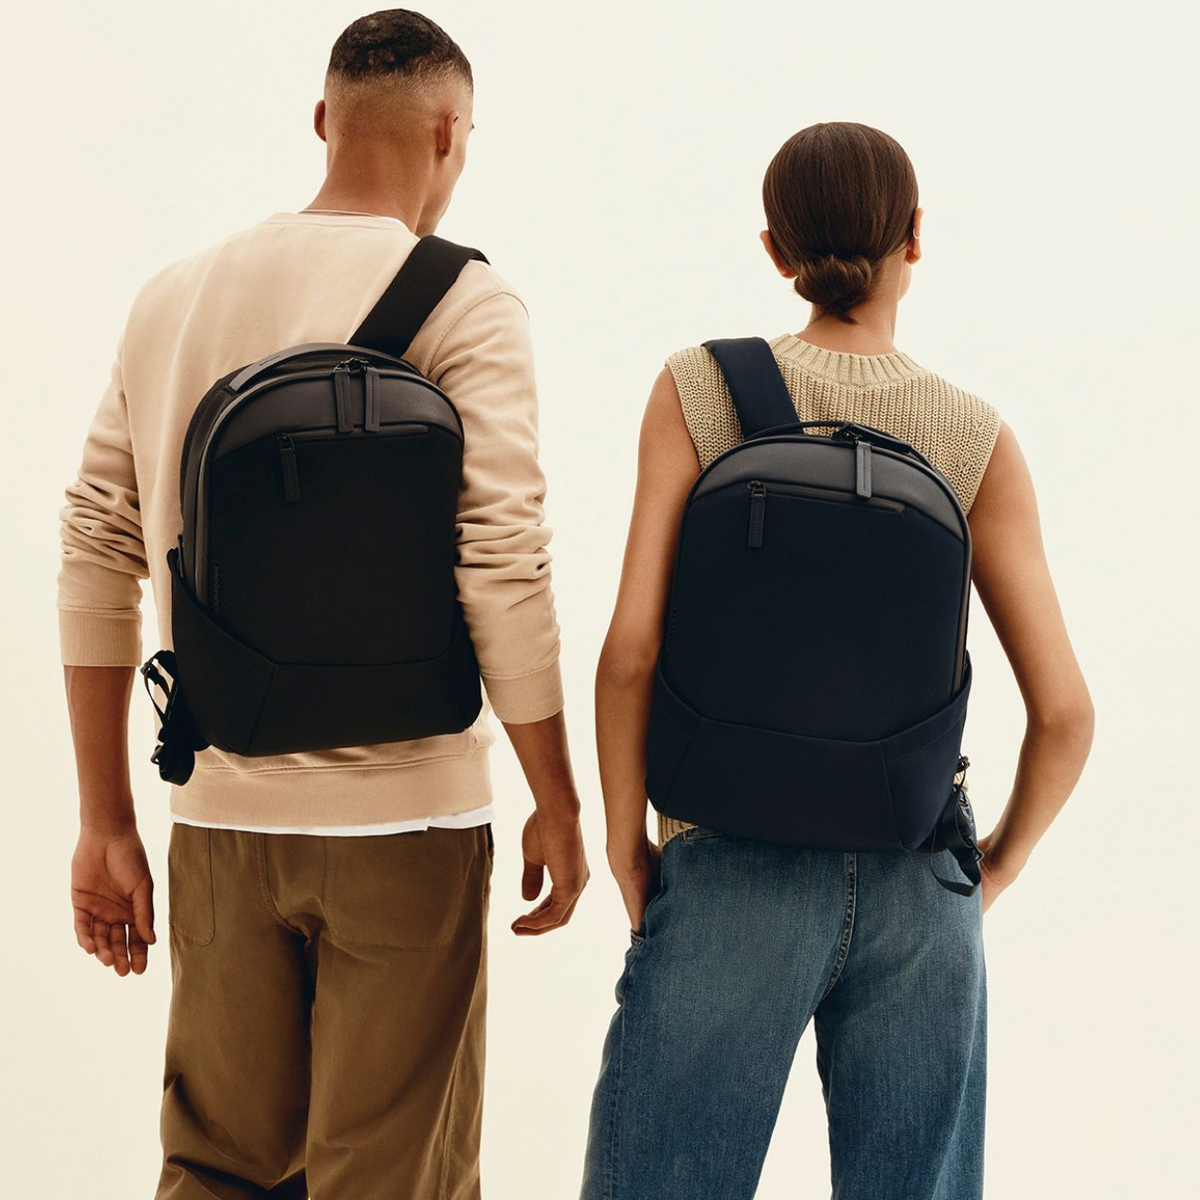 Troubadour Apex Compact Backpack 3.0 – The Shop at Equinox